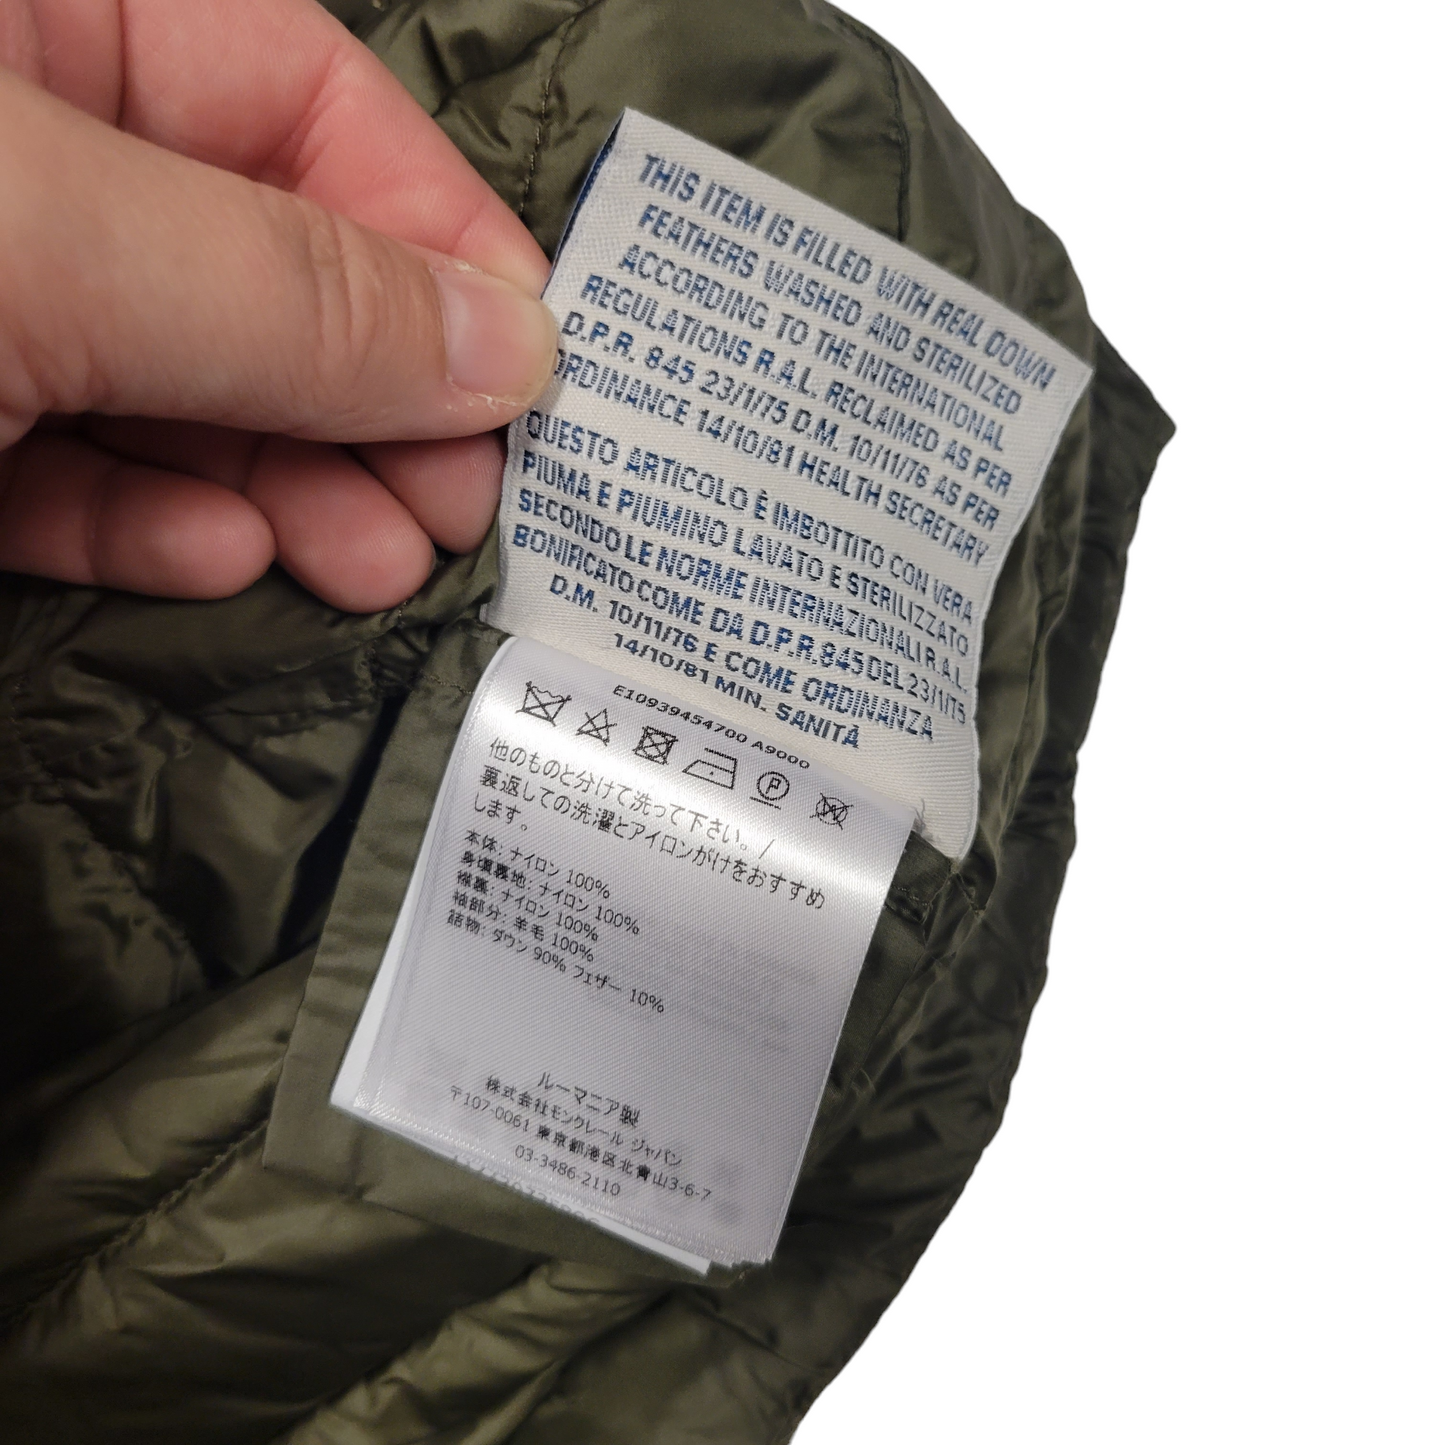 Luxury Jacket Puffer & Quilted By Moncler  Size: S